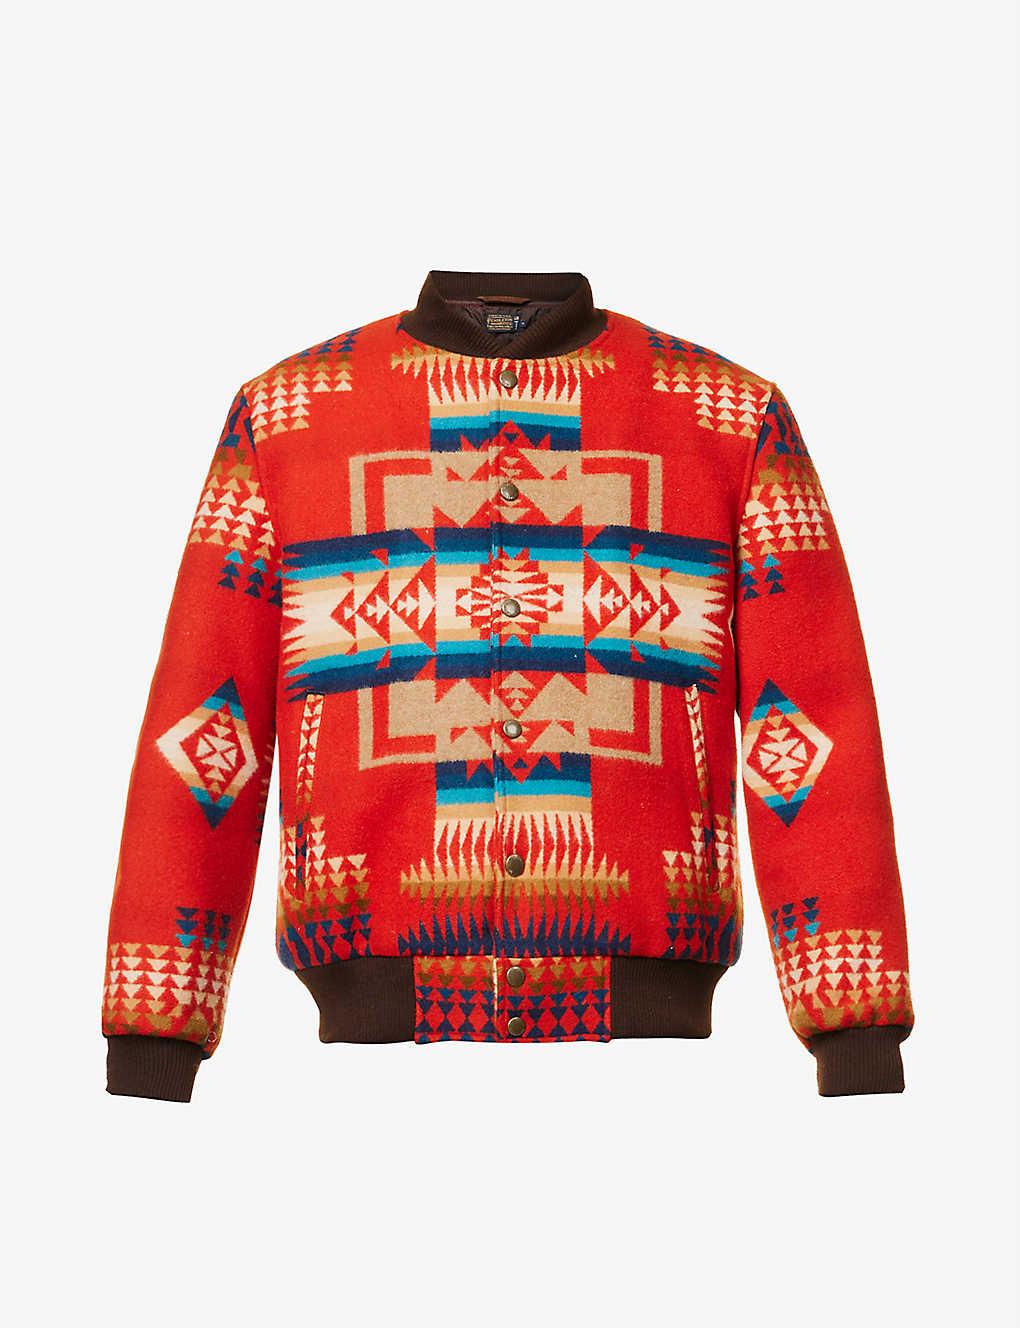 Pendleton Gorge Patterned Wool And Cotton-blend Bomber Jacket in Red ...